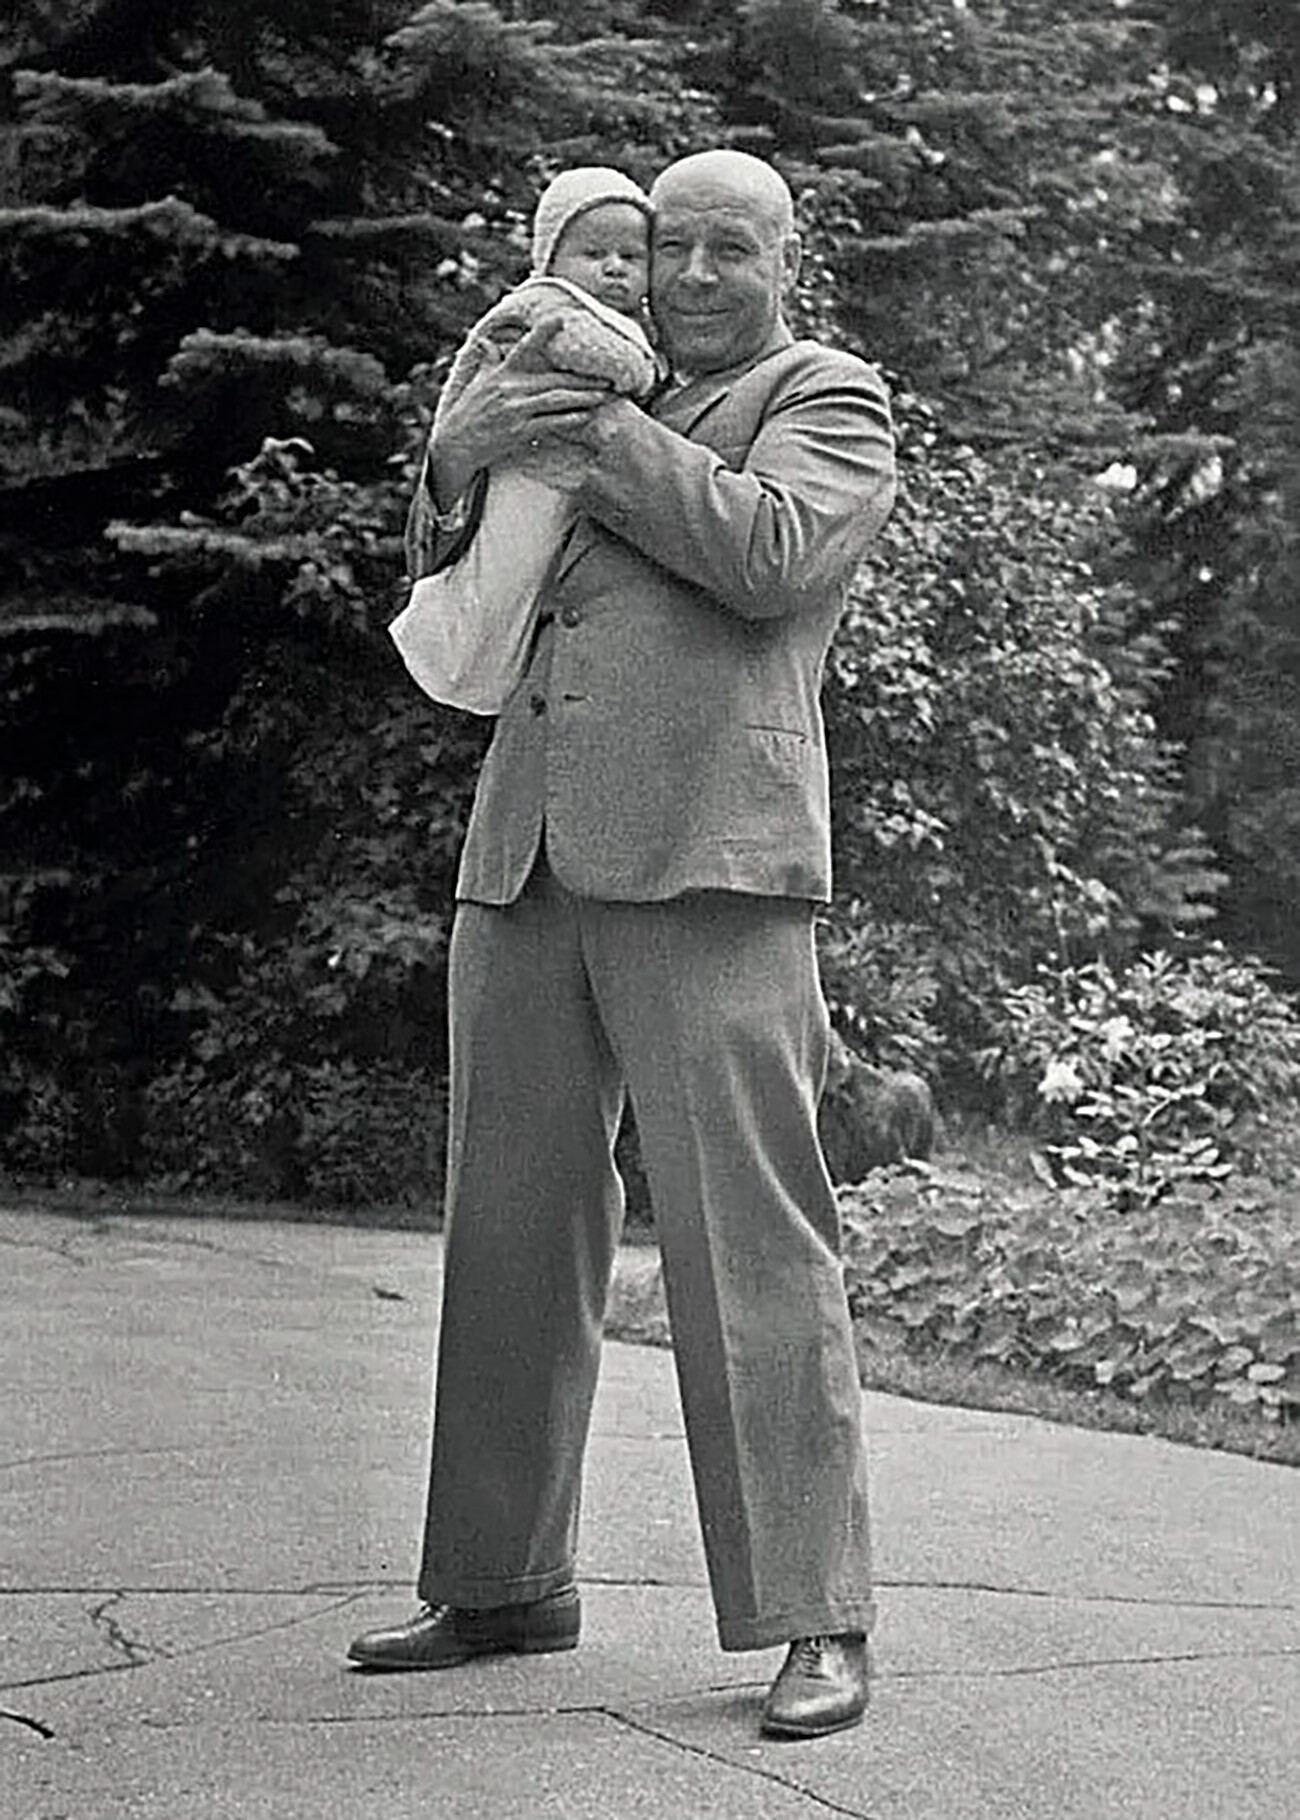 Timoshenko with one of his grandsons.